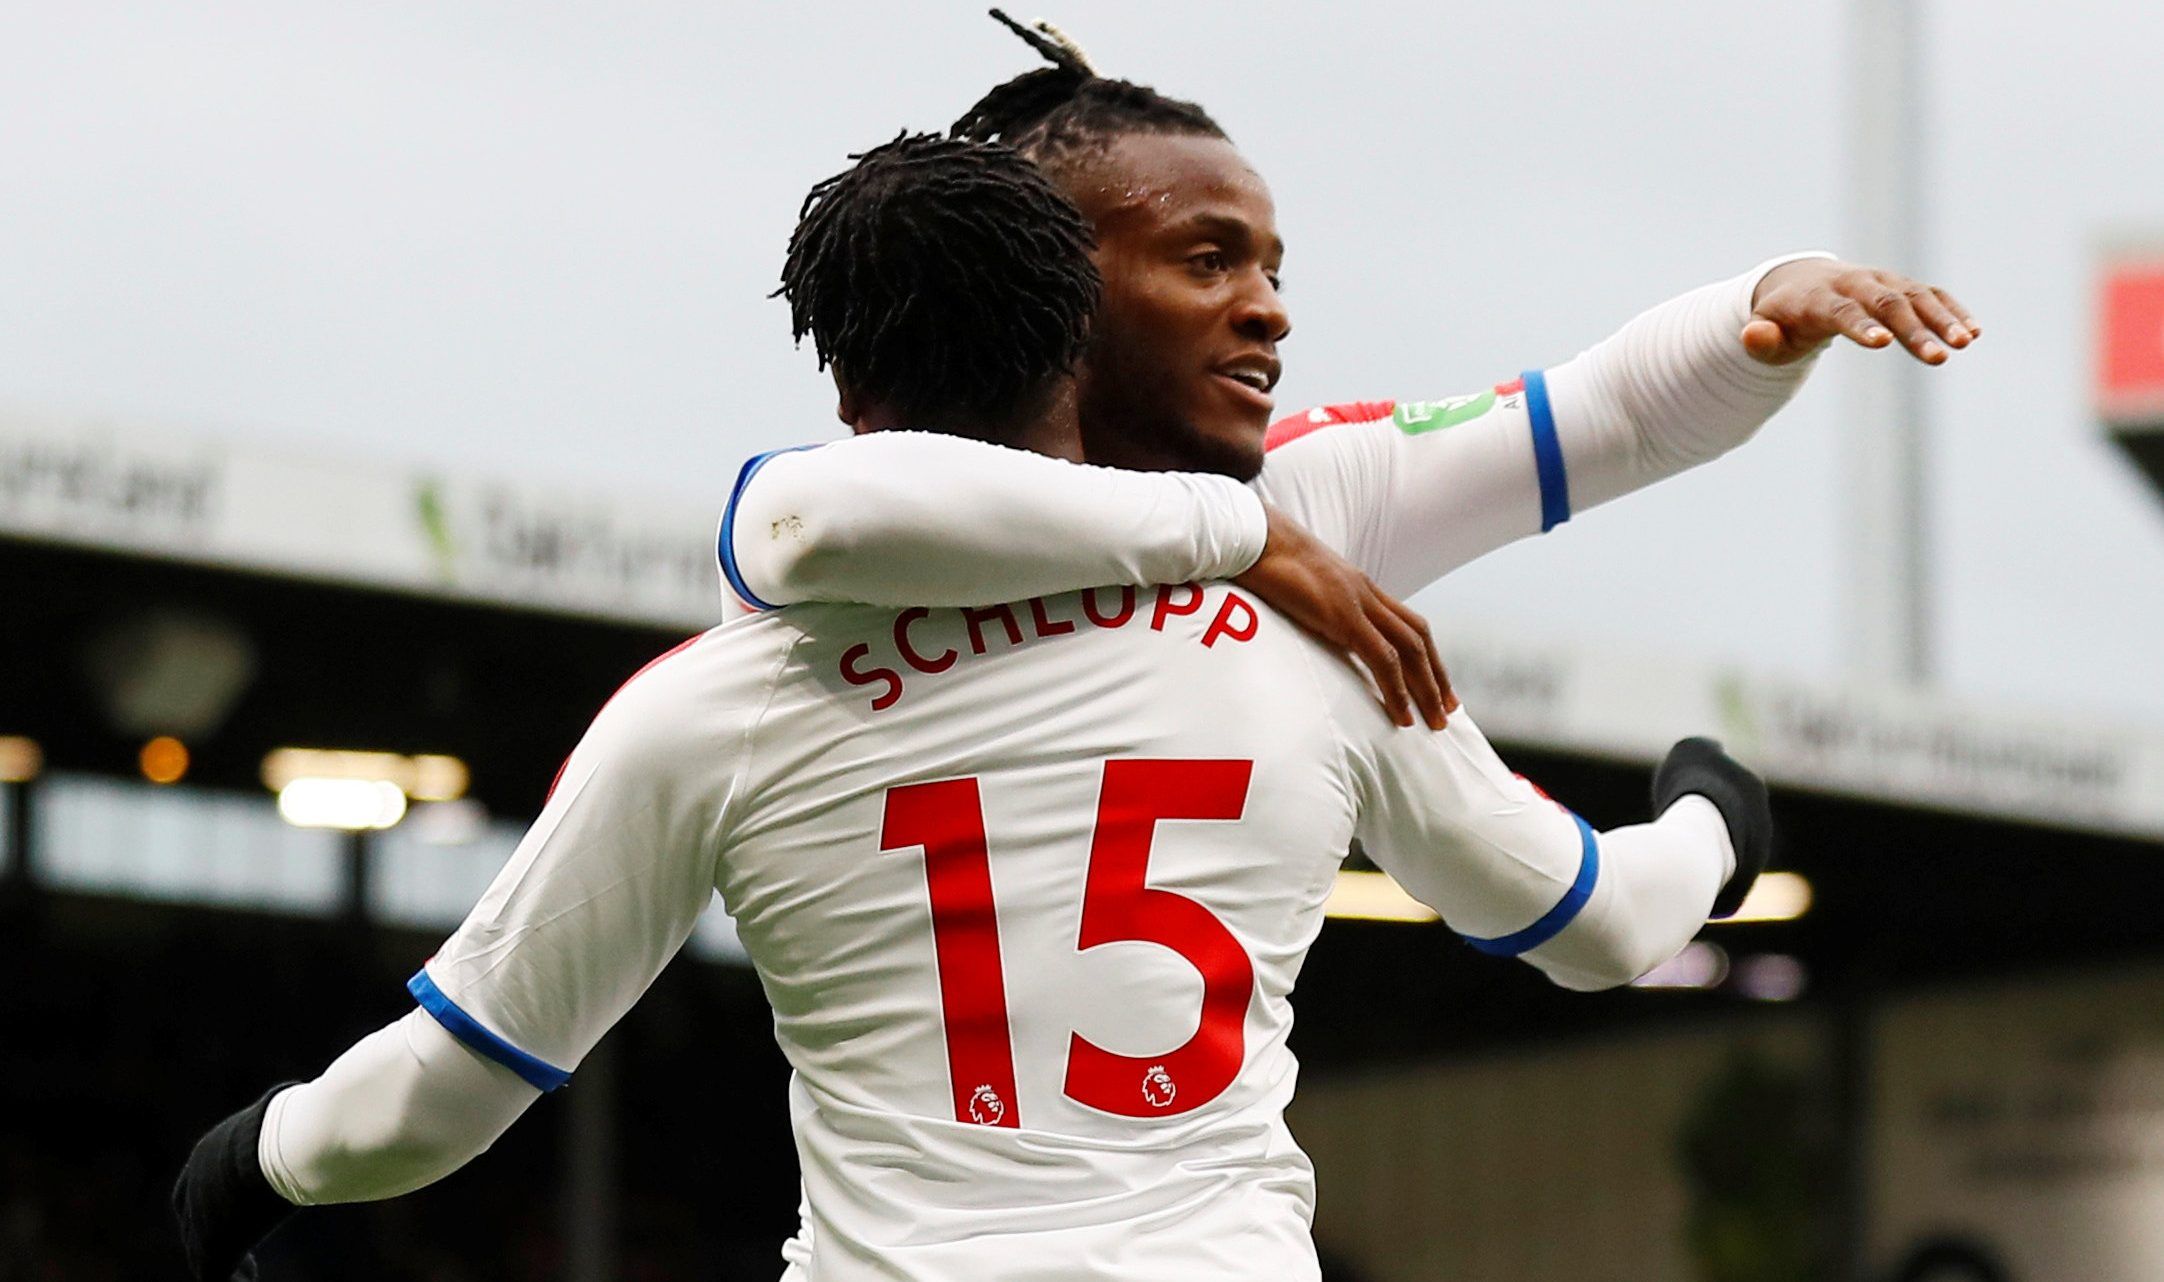 Soccer Football - Premier League - Burnley v Crystal Palace - Turf Moor, Burnley, Britain - March 2, 2019  Crystal Palace's Michy Batshuayi celebrates their first goal with Jeffrey Schlupp   Action Images via Reuters/Jason Cairnduff  EDITORIAL USE ONLY. No use with unauthorized audio, video, data, fixture lists, club/league logos or 